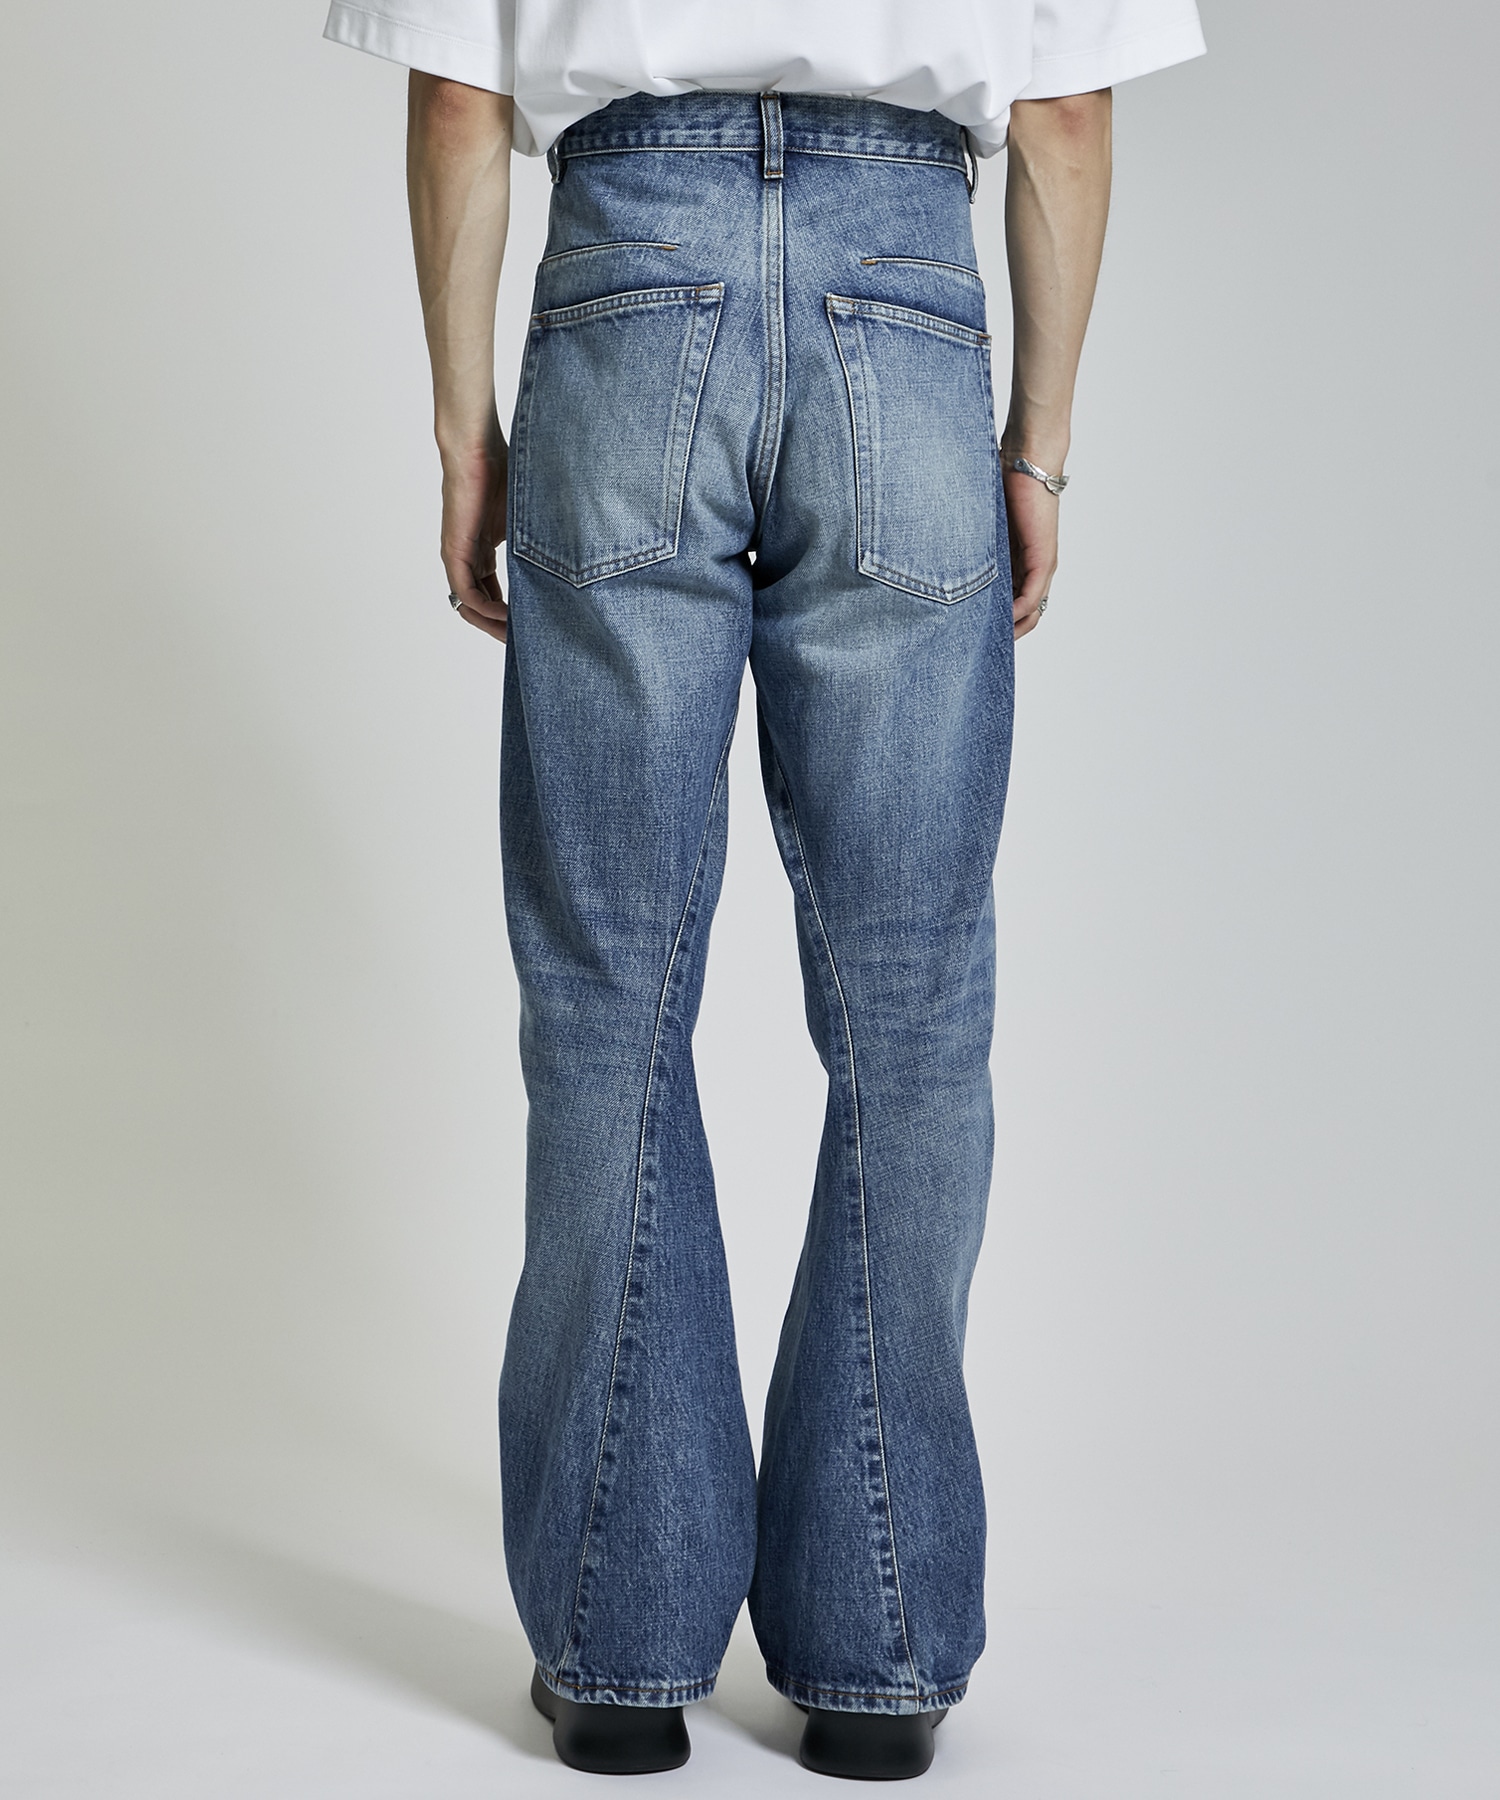 NVRFRGT 3D Twisted Jeans